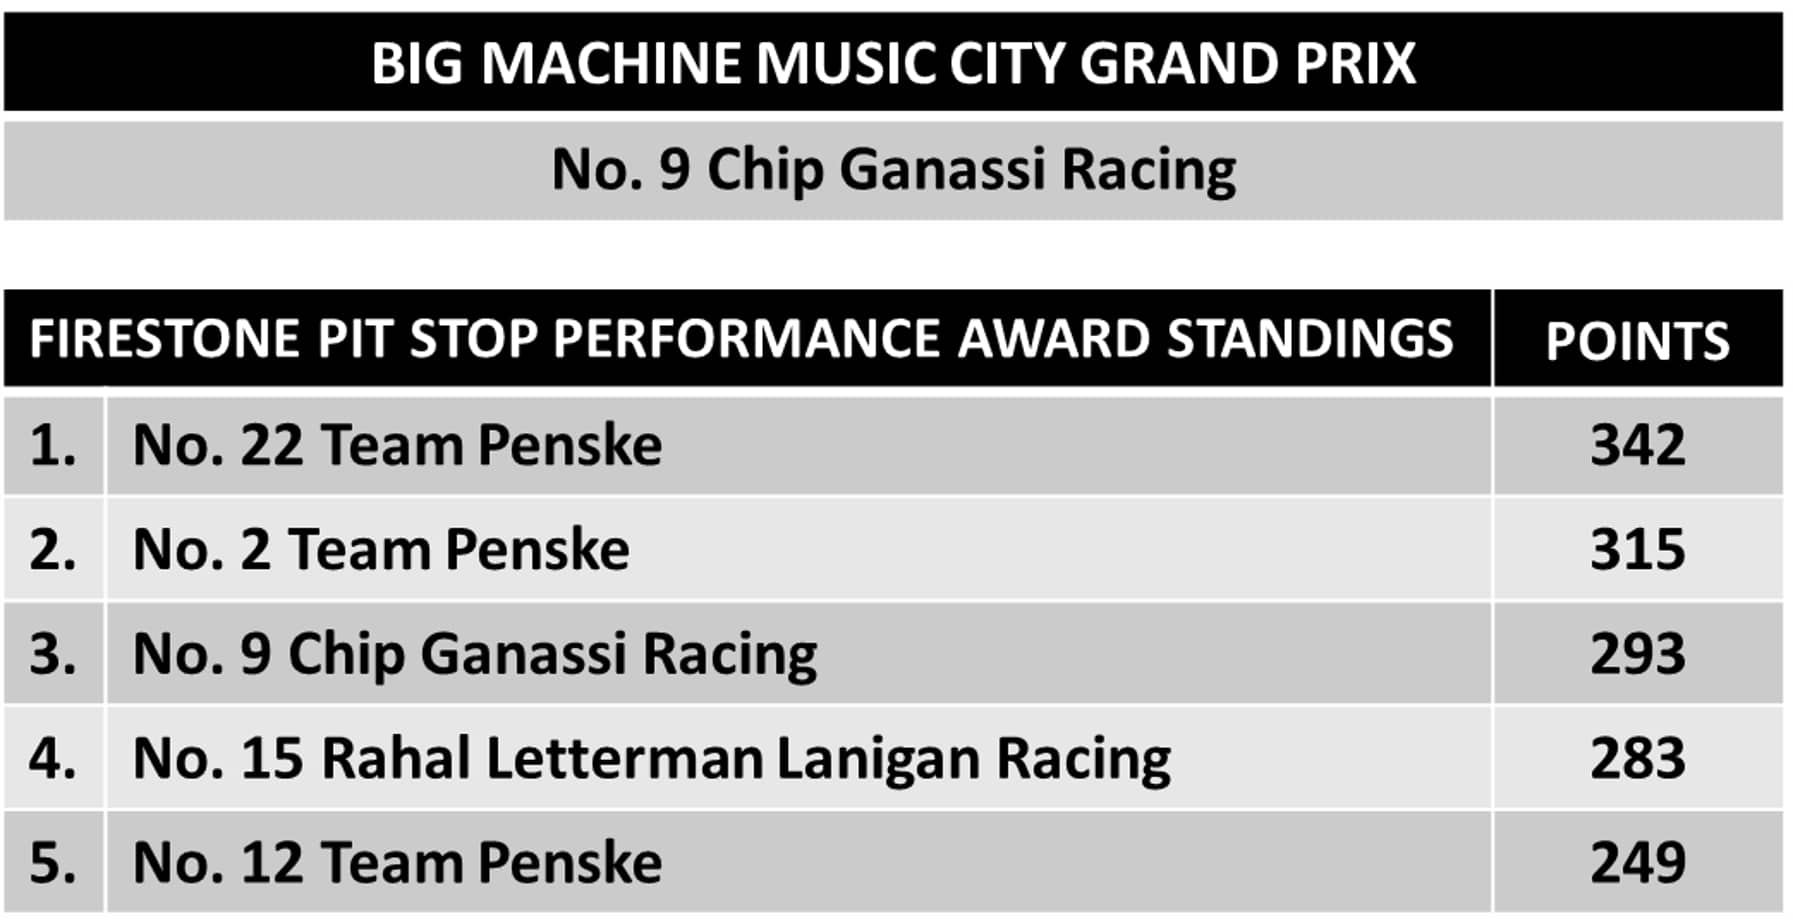 Table showing Big Machine Music City Grand Prix point totals.